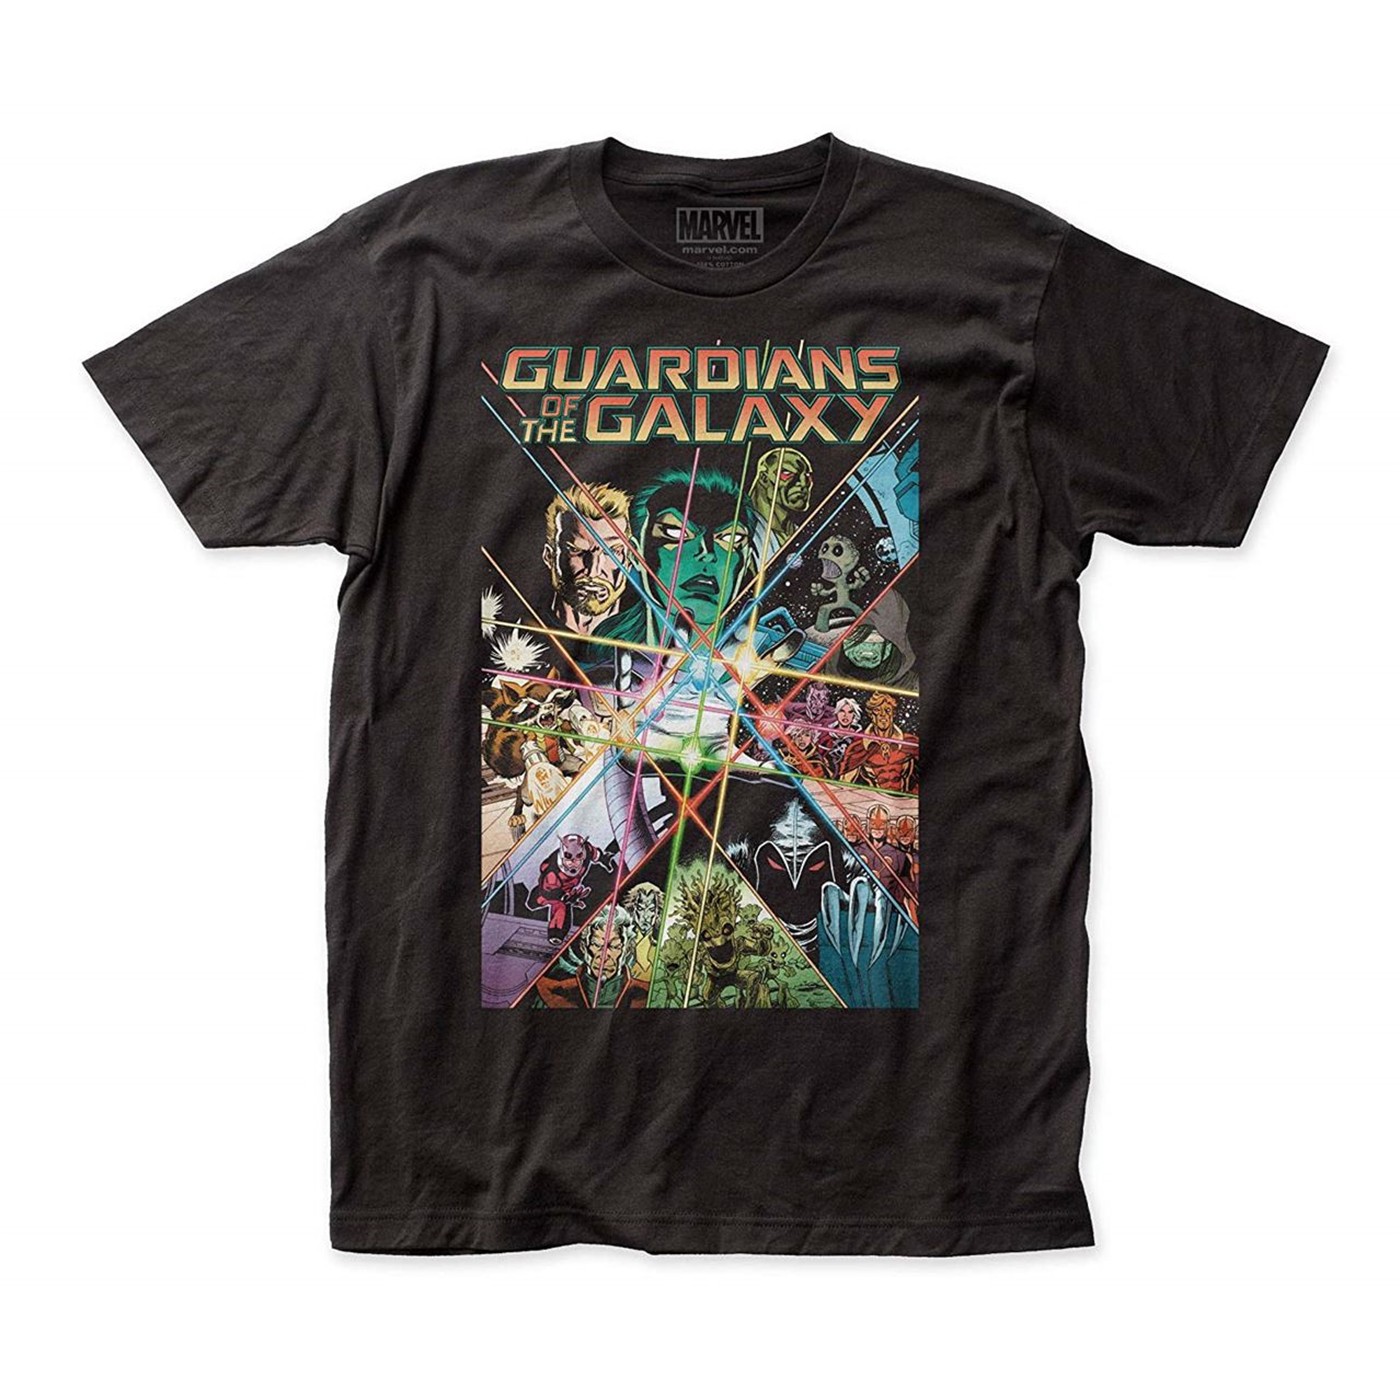 Guardians of the Galaxy Comic Cover Men's T-Shirt